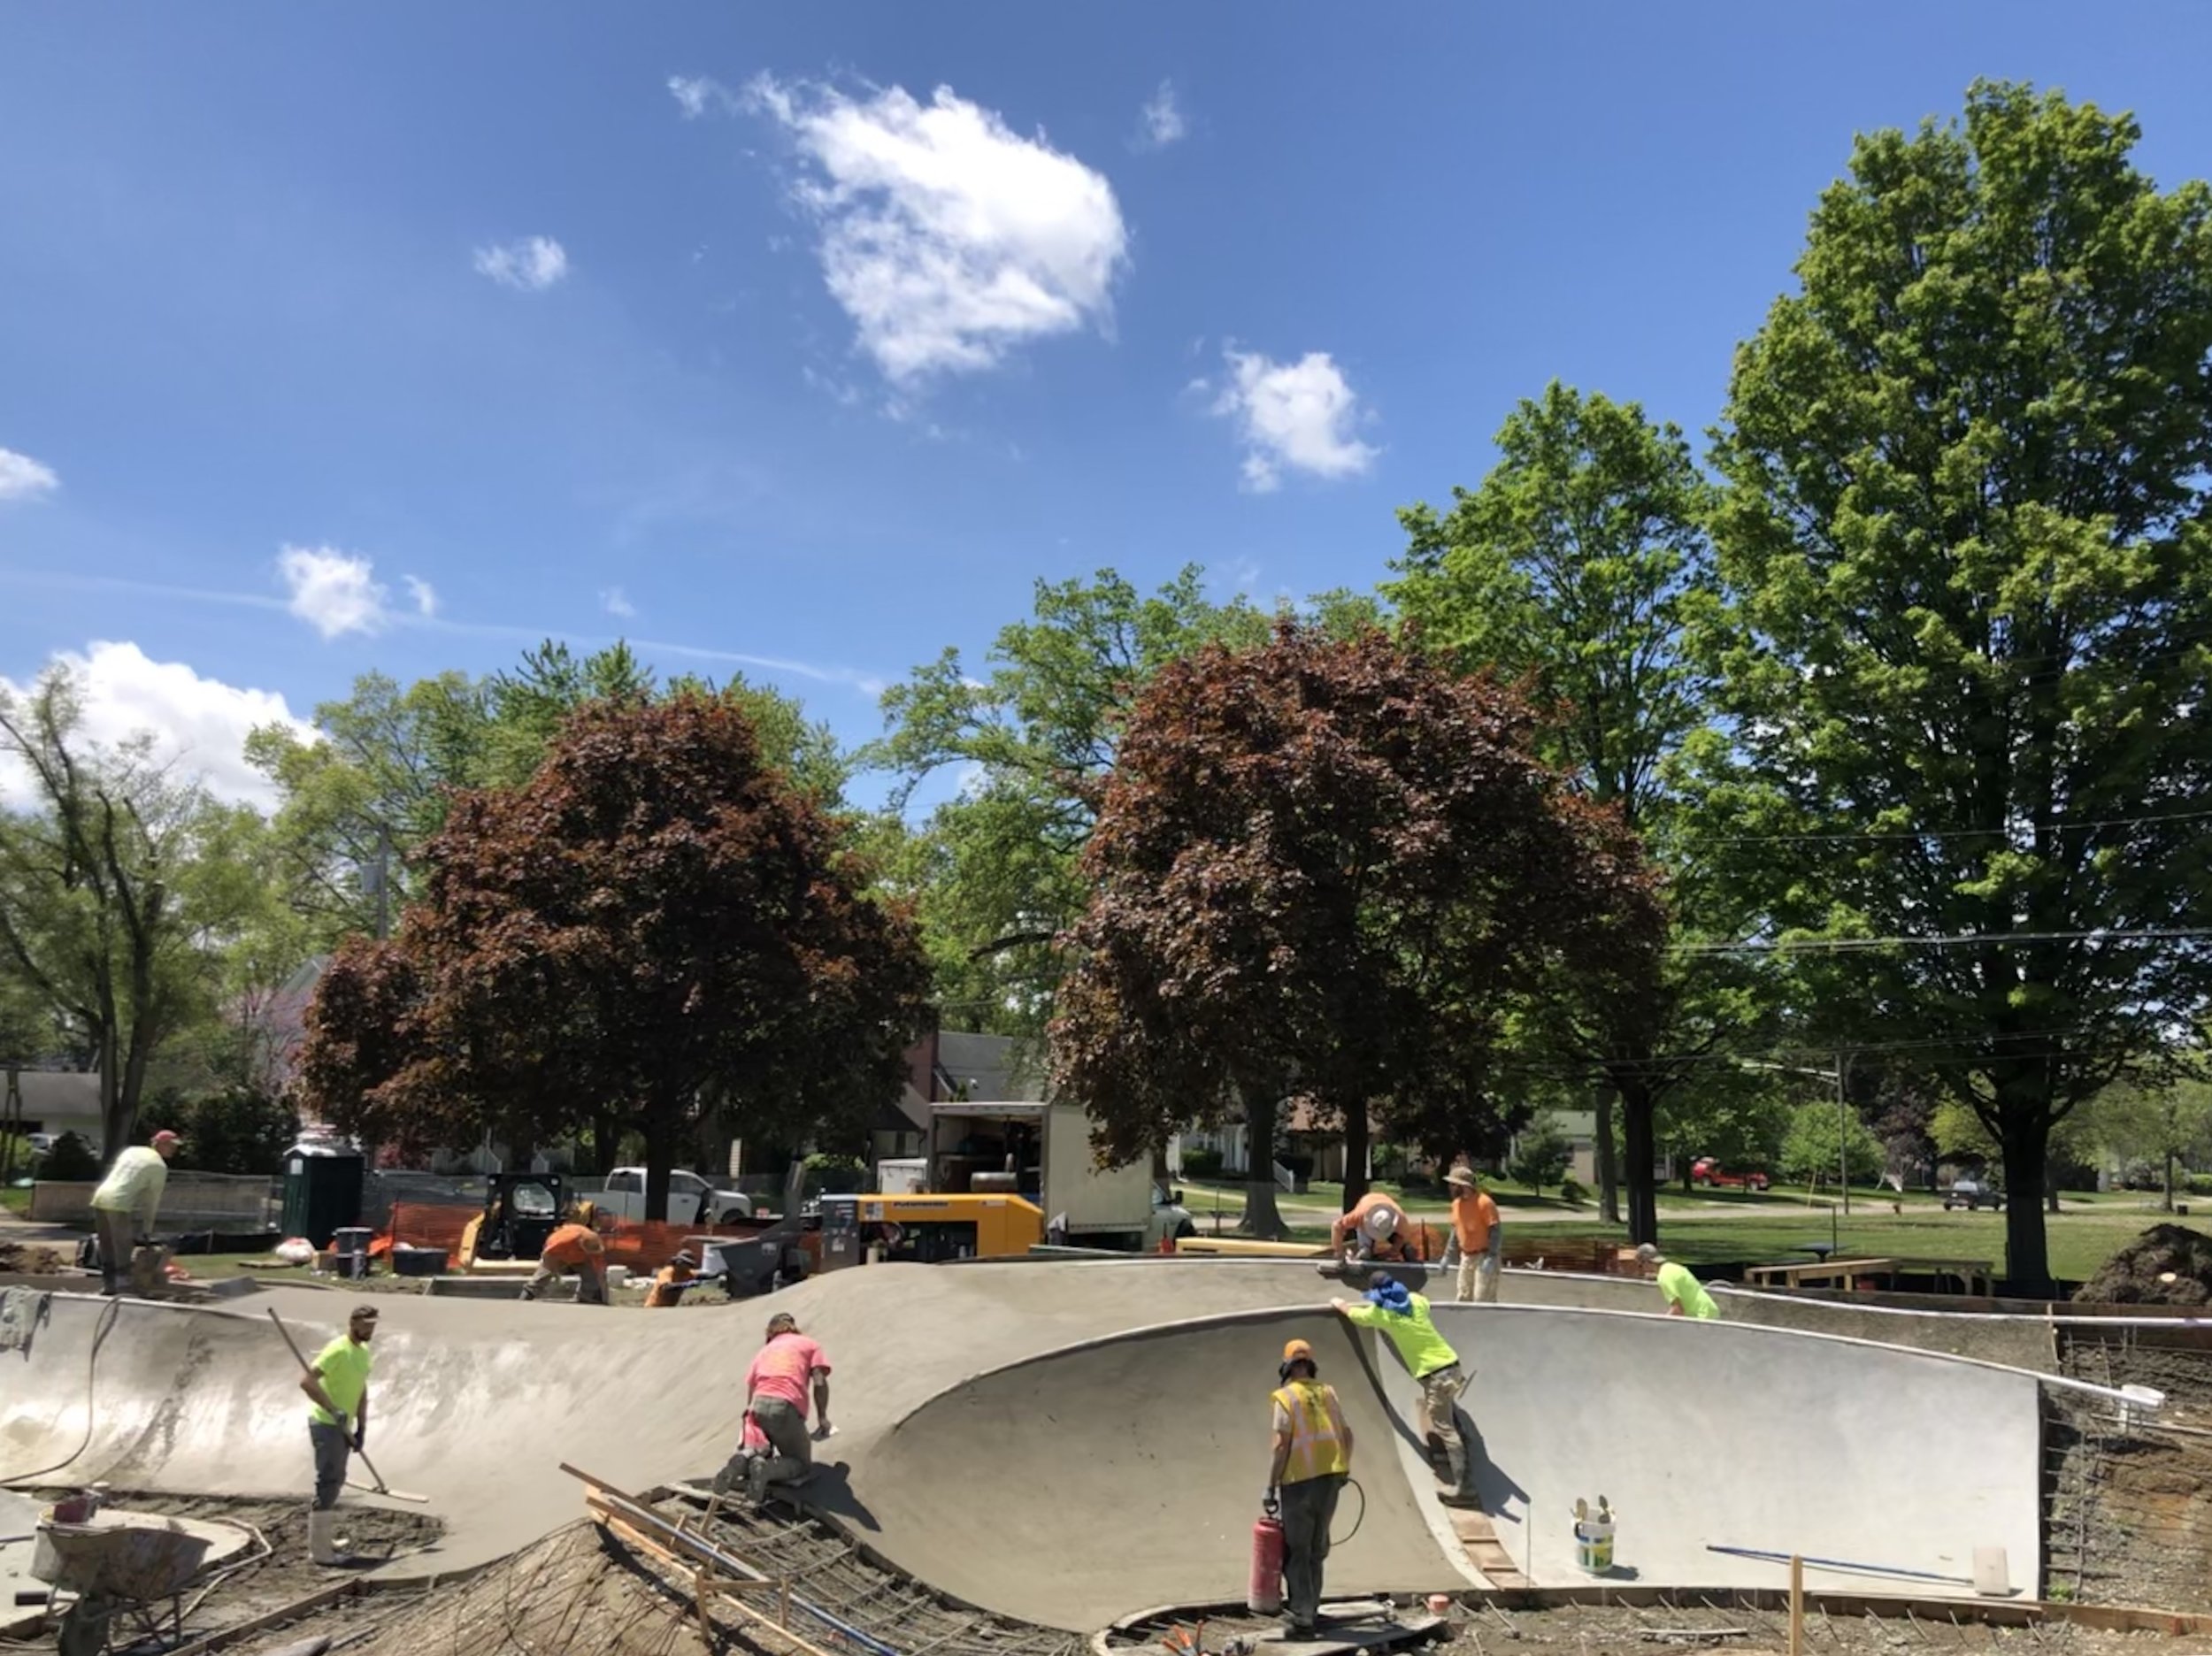 Did you know there is a skatepark renaissance going on in Michigan? 💪🏽💯We’ve built 6 parks there over the last few years making it one of the Midwest’s best #skateboarding destinations 😀